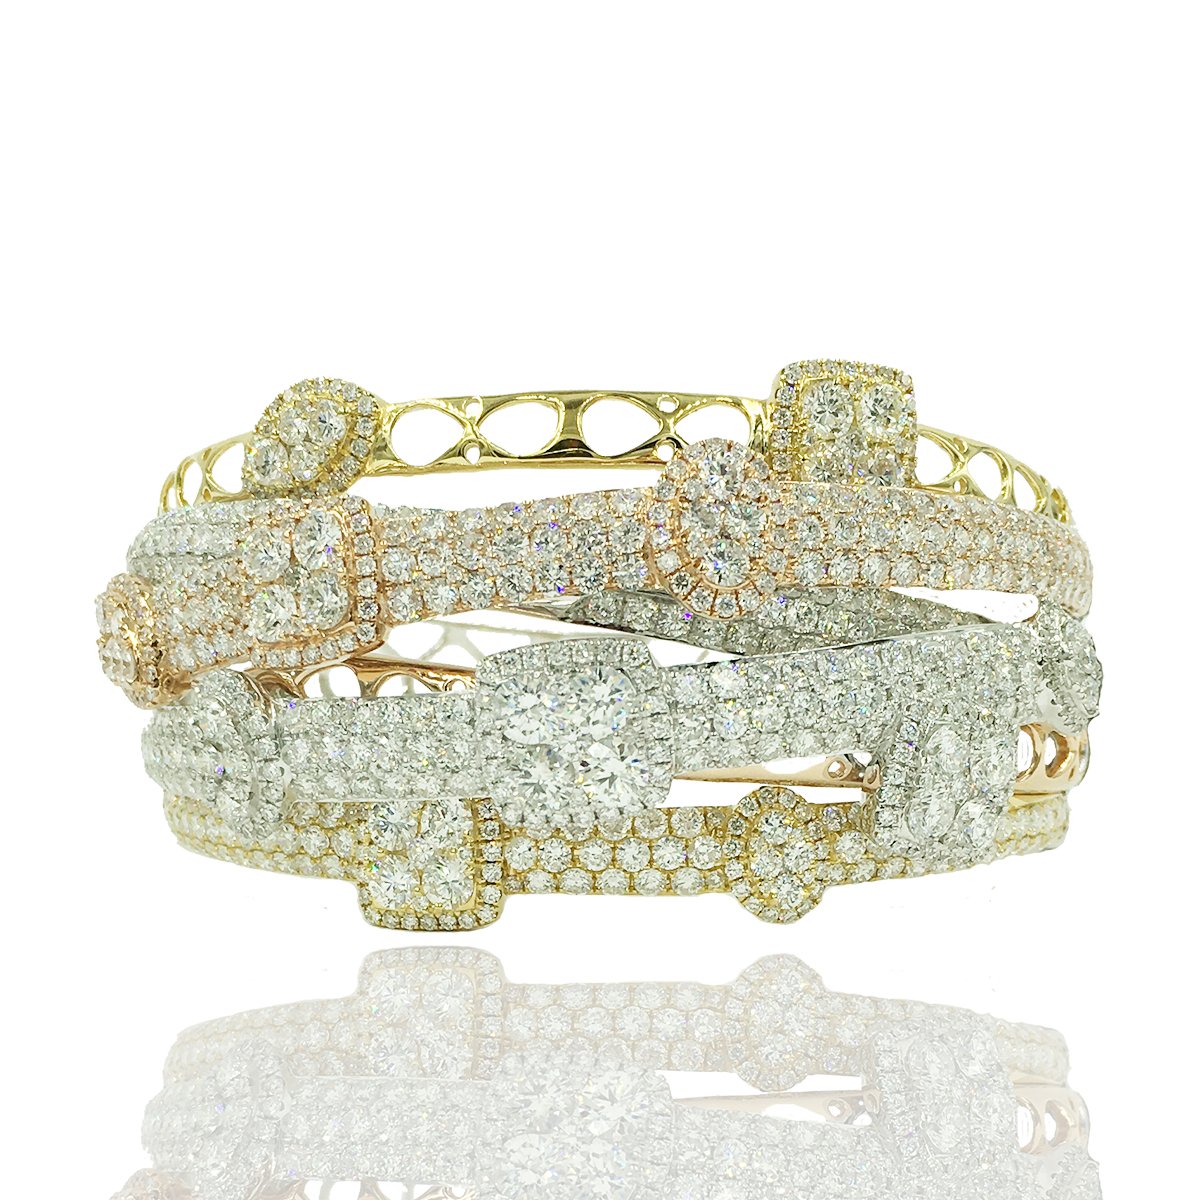 Stacked Diamonds and Gold Sparkle in this bracelet.